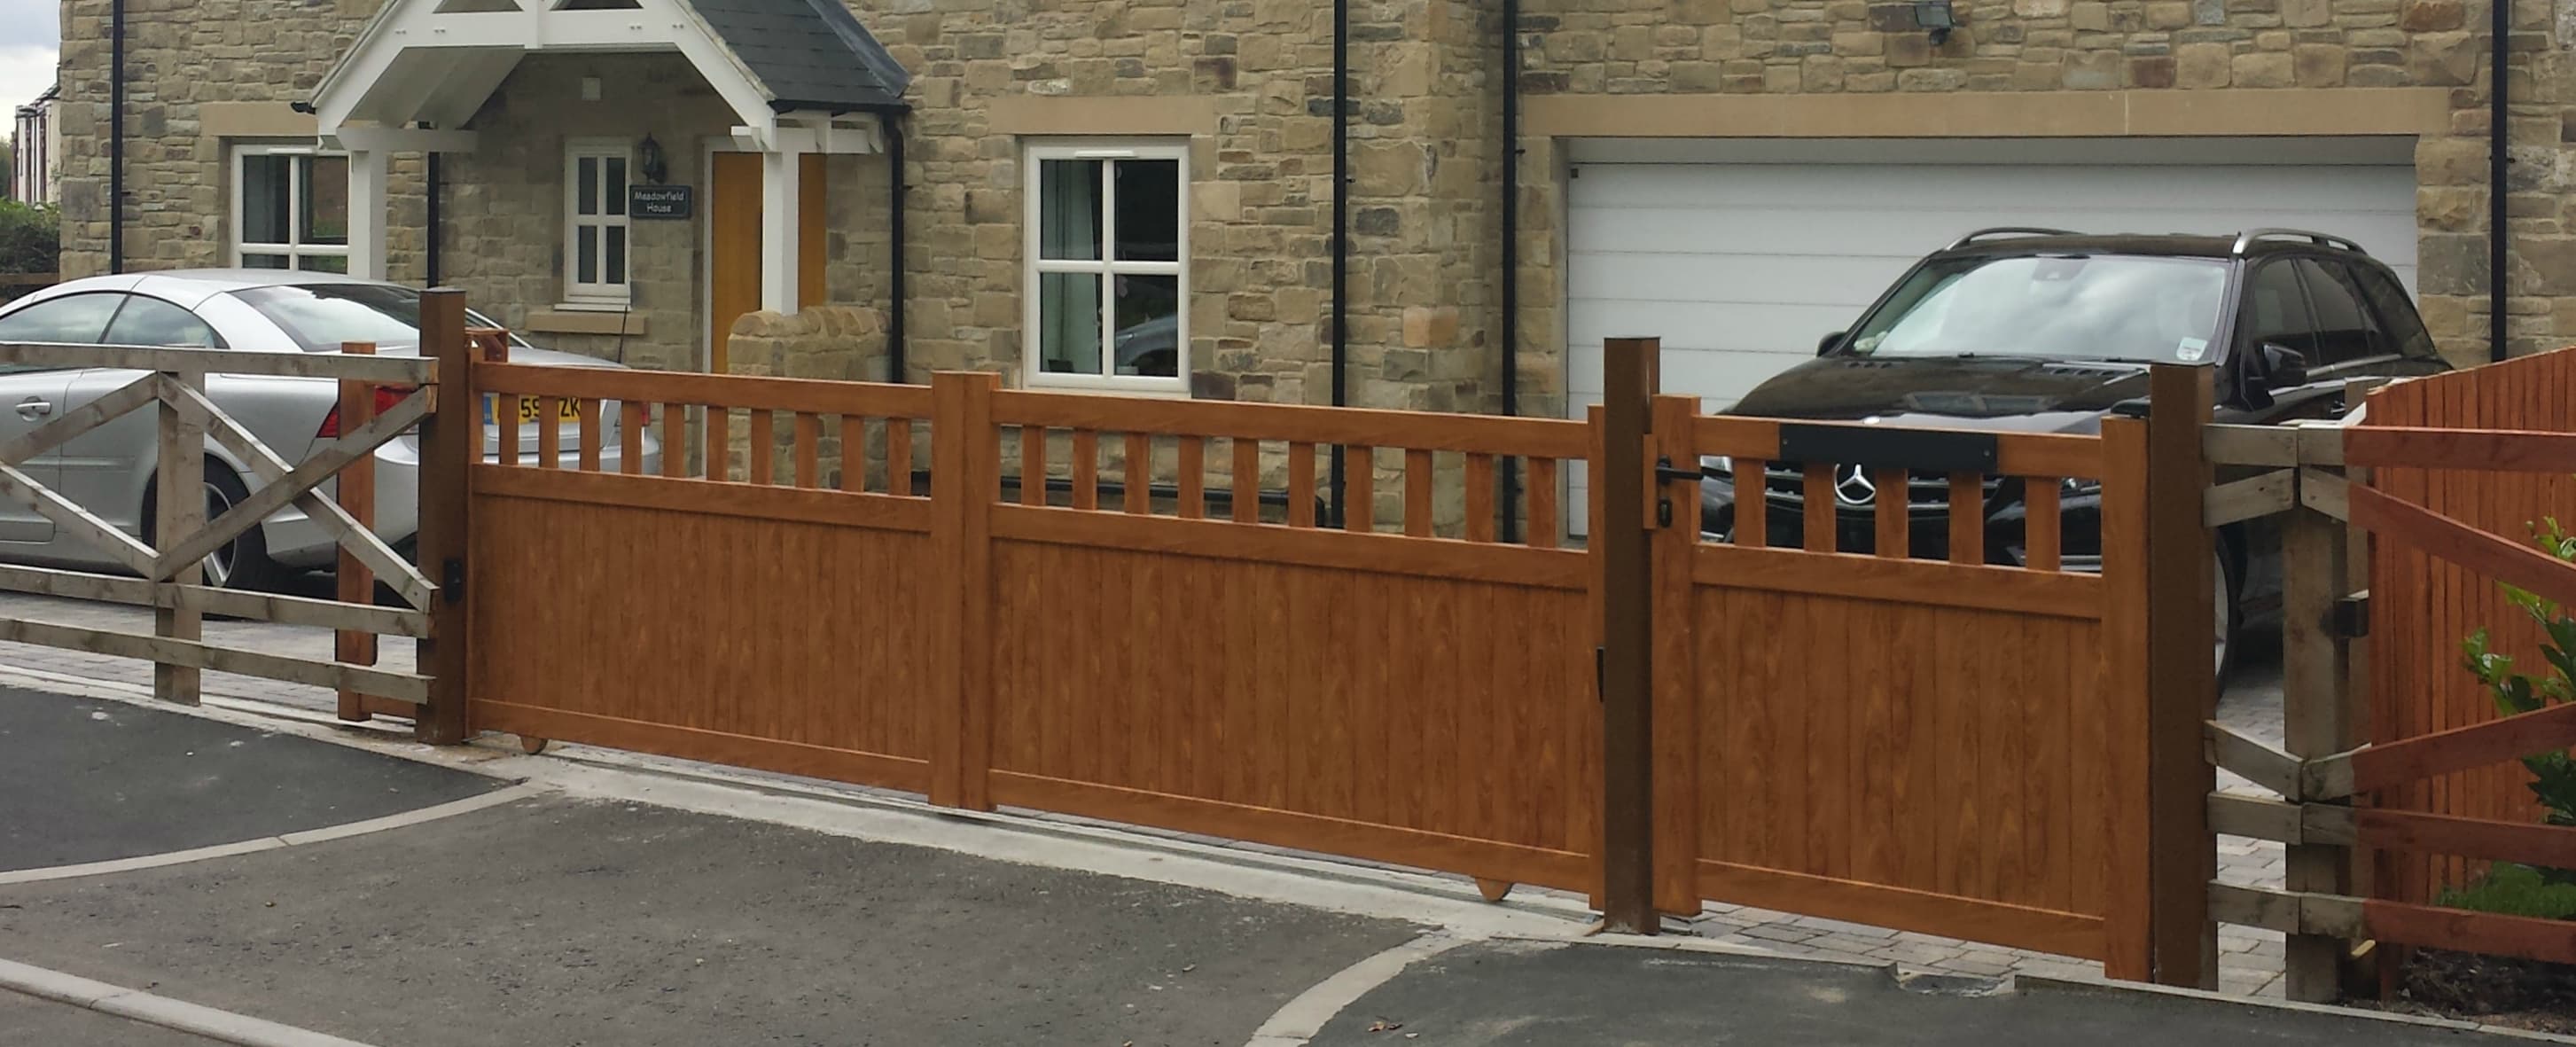 Aluminium driveway gates with a wooden appearance in front of a stone house with parked cars.